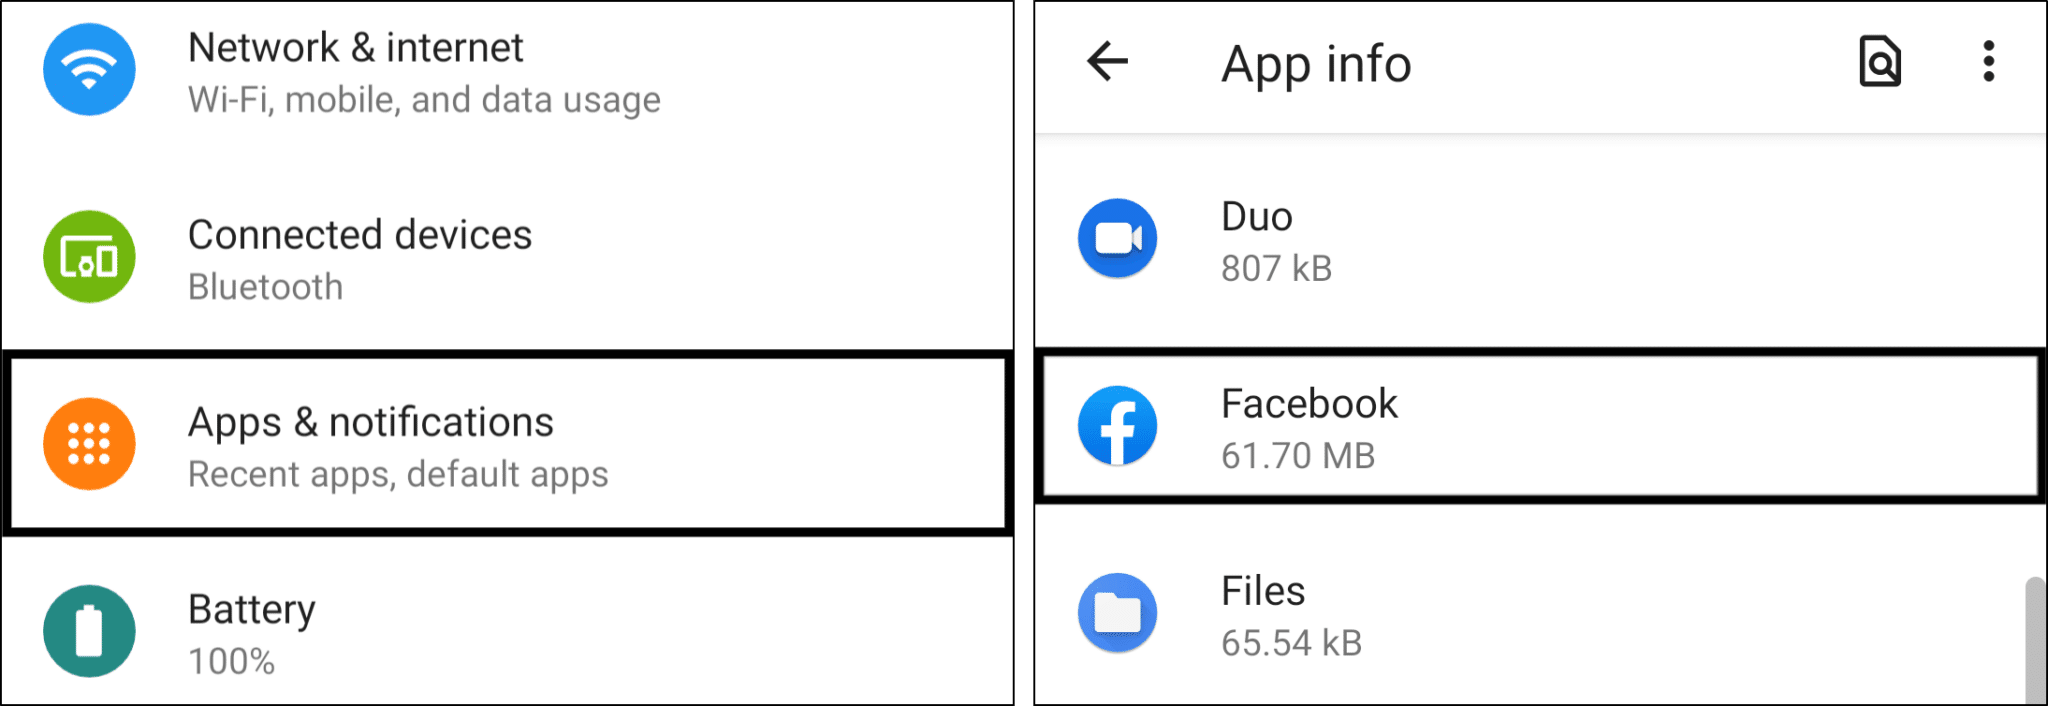 access Facebook app settings in system settings on Android to clear cache and data to fix the Facebook search bar or function not working